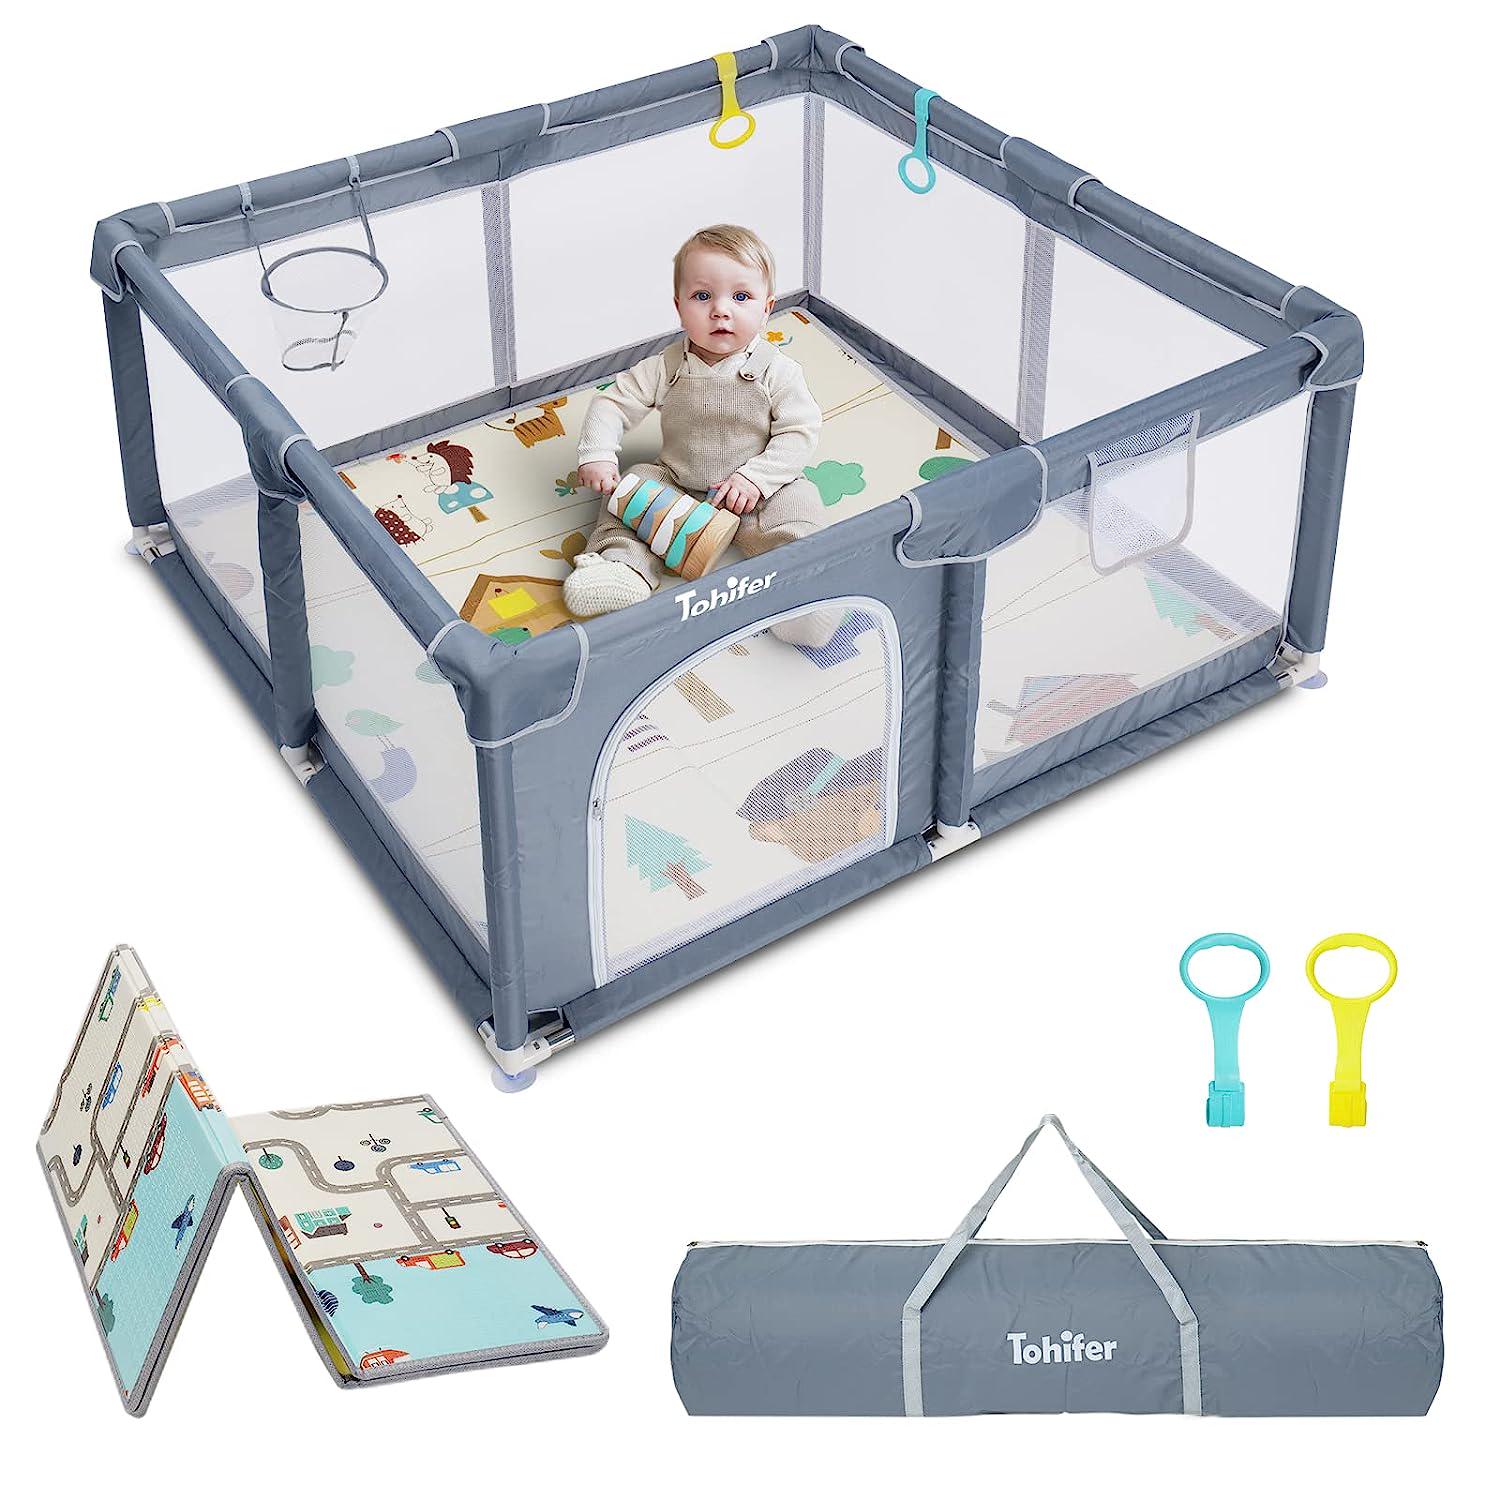 Baby Playpen with Mat, Large Baby Playard for Toddler, BPA-Free, Non-Toxic, Safe No Gaps Play Yard for Babies, Indoor and Outdoor Kids Activity Center 47 x47 x26.5 with 0.4 Foldable Playmat-